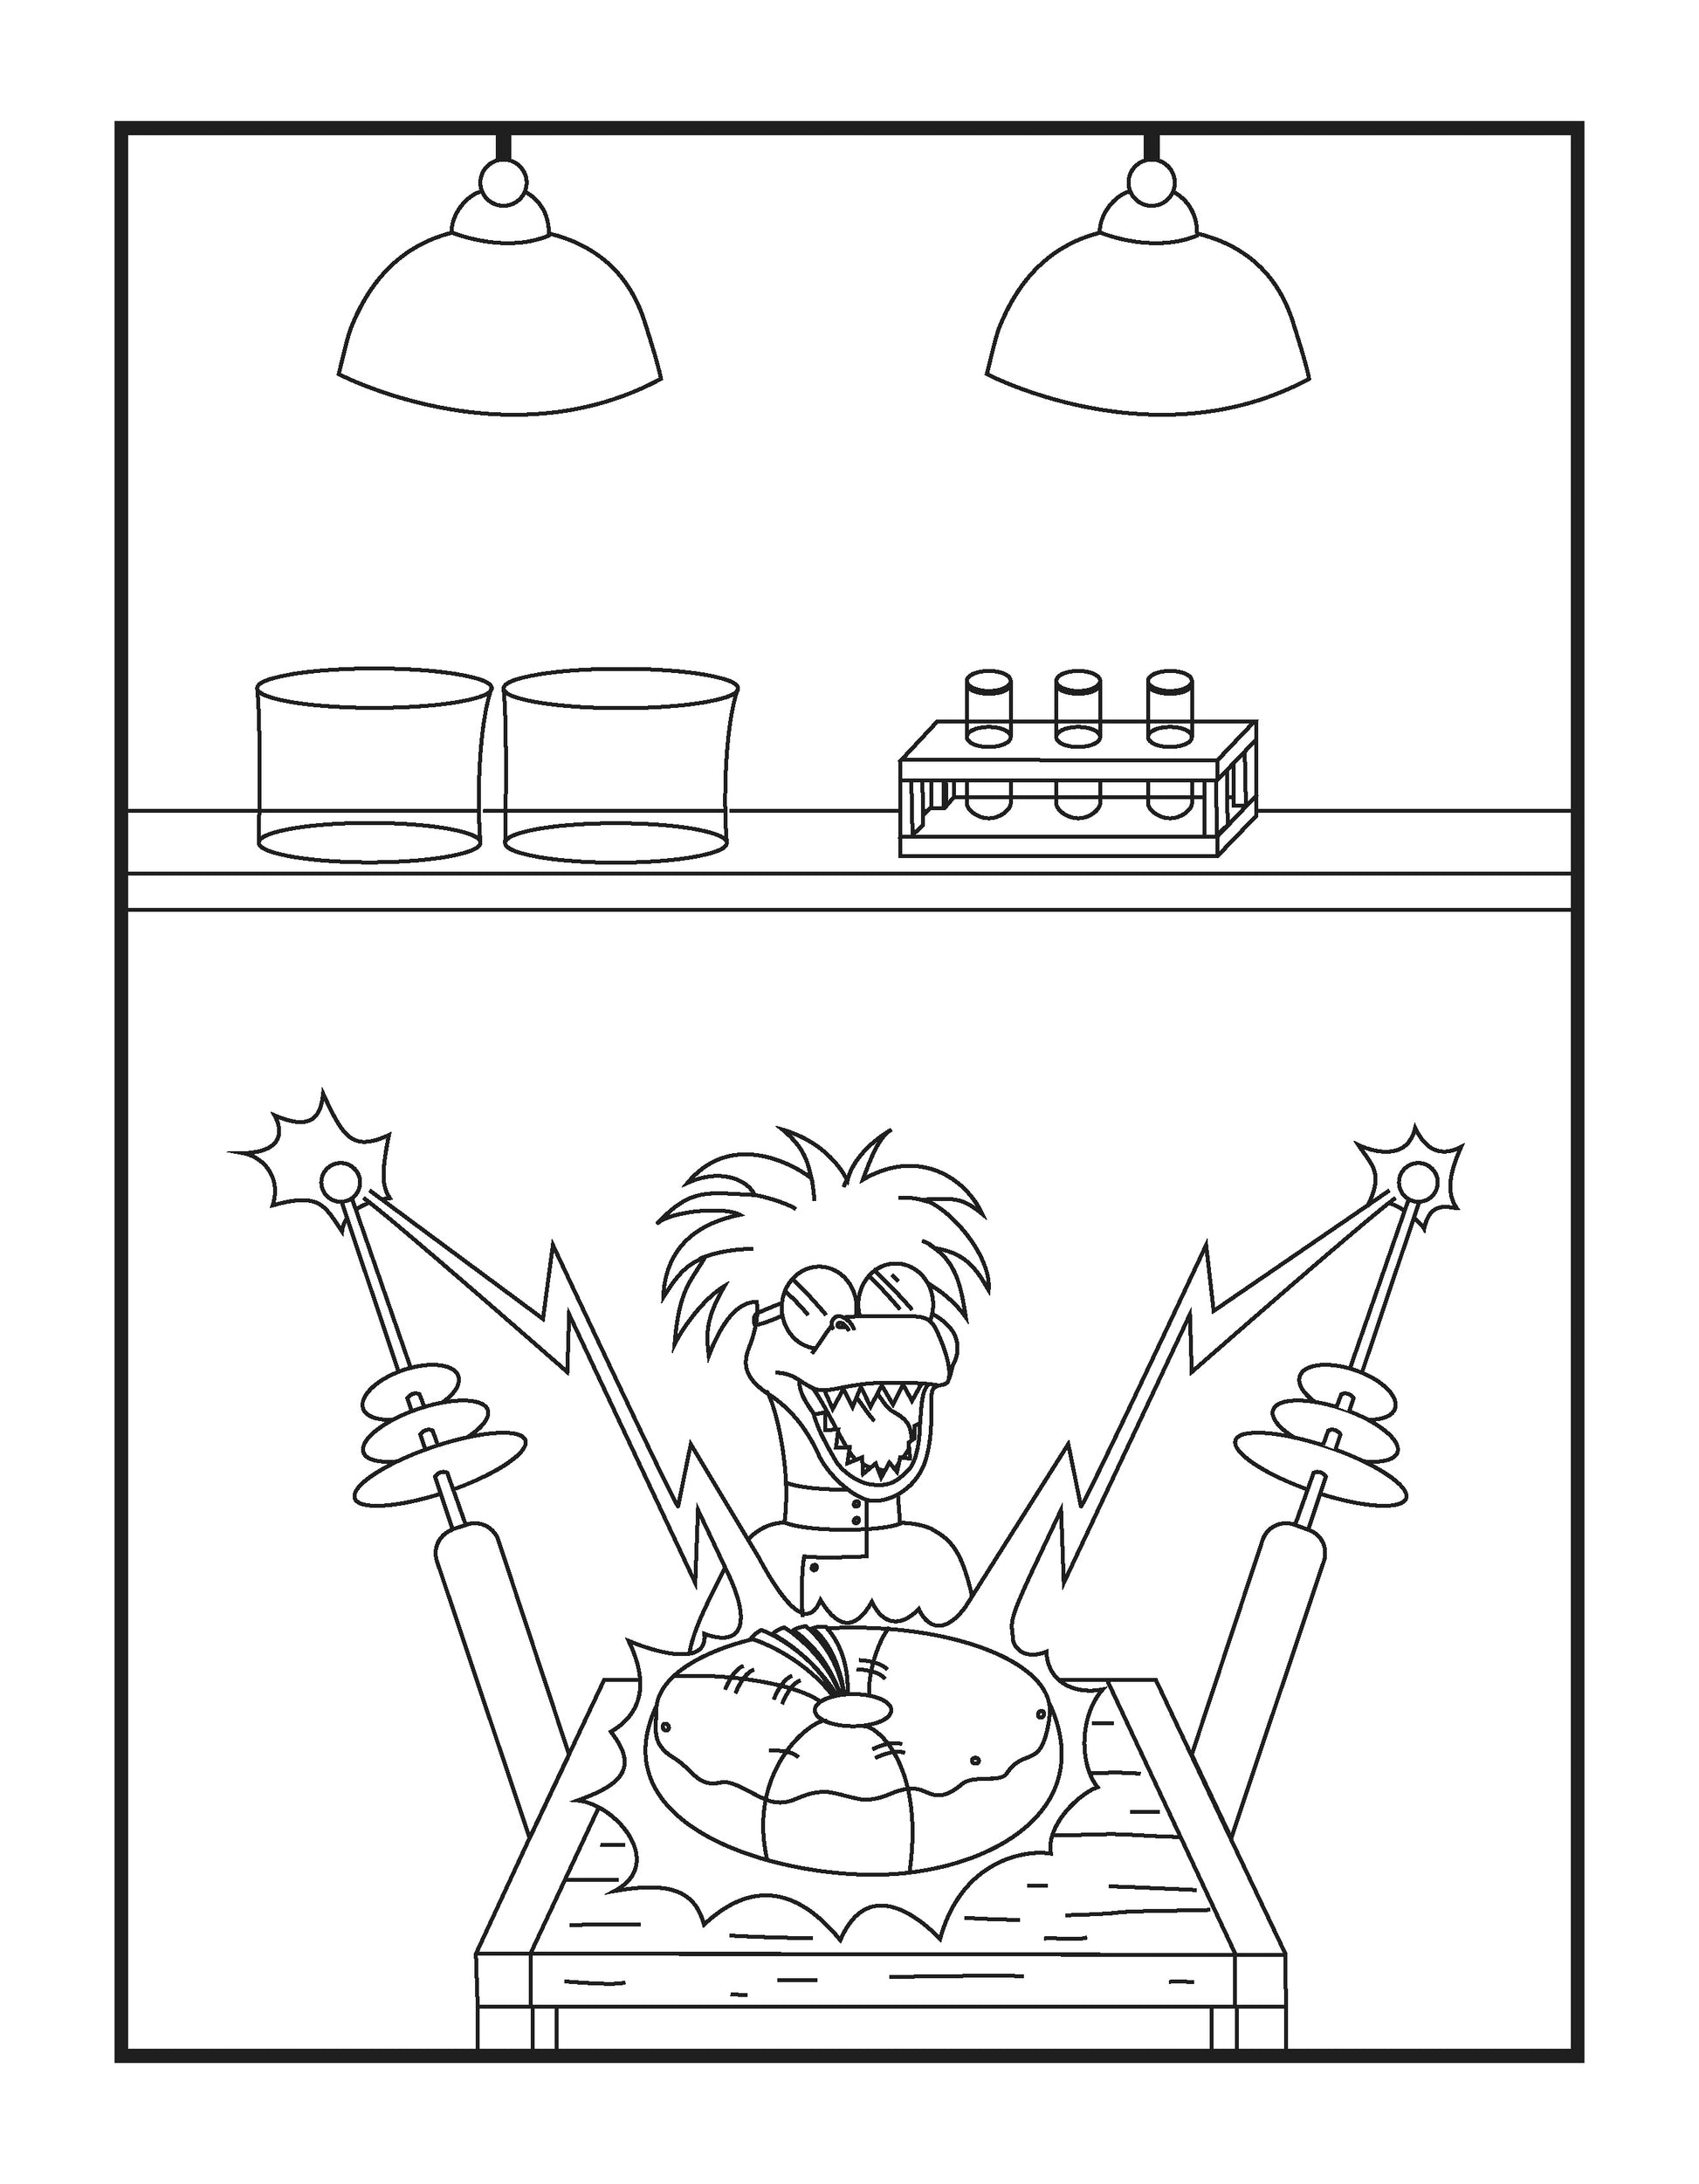 The illustration is a black and white line drawing of a mad scientist's laboratory. At the center is a crazed scientist with wild hair, gleefully holding two electrical rods with sparks at the ends, symbolizing a successful experiment. On the table in front of the scientist is a large, stitched-together, metal doughnut, suggesting a Frankenstein-like creation. Above, two large dome lights hang from the ceiling, and on a shelf, various scientific apparatuses are neatly arranged.